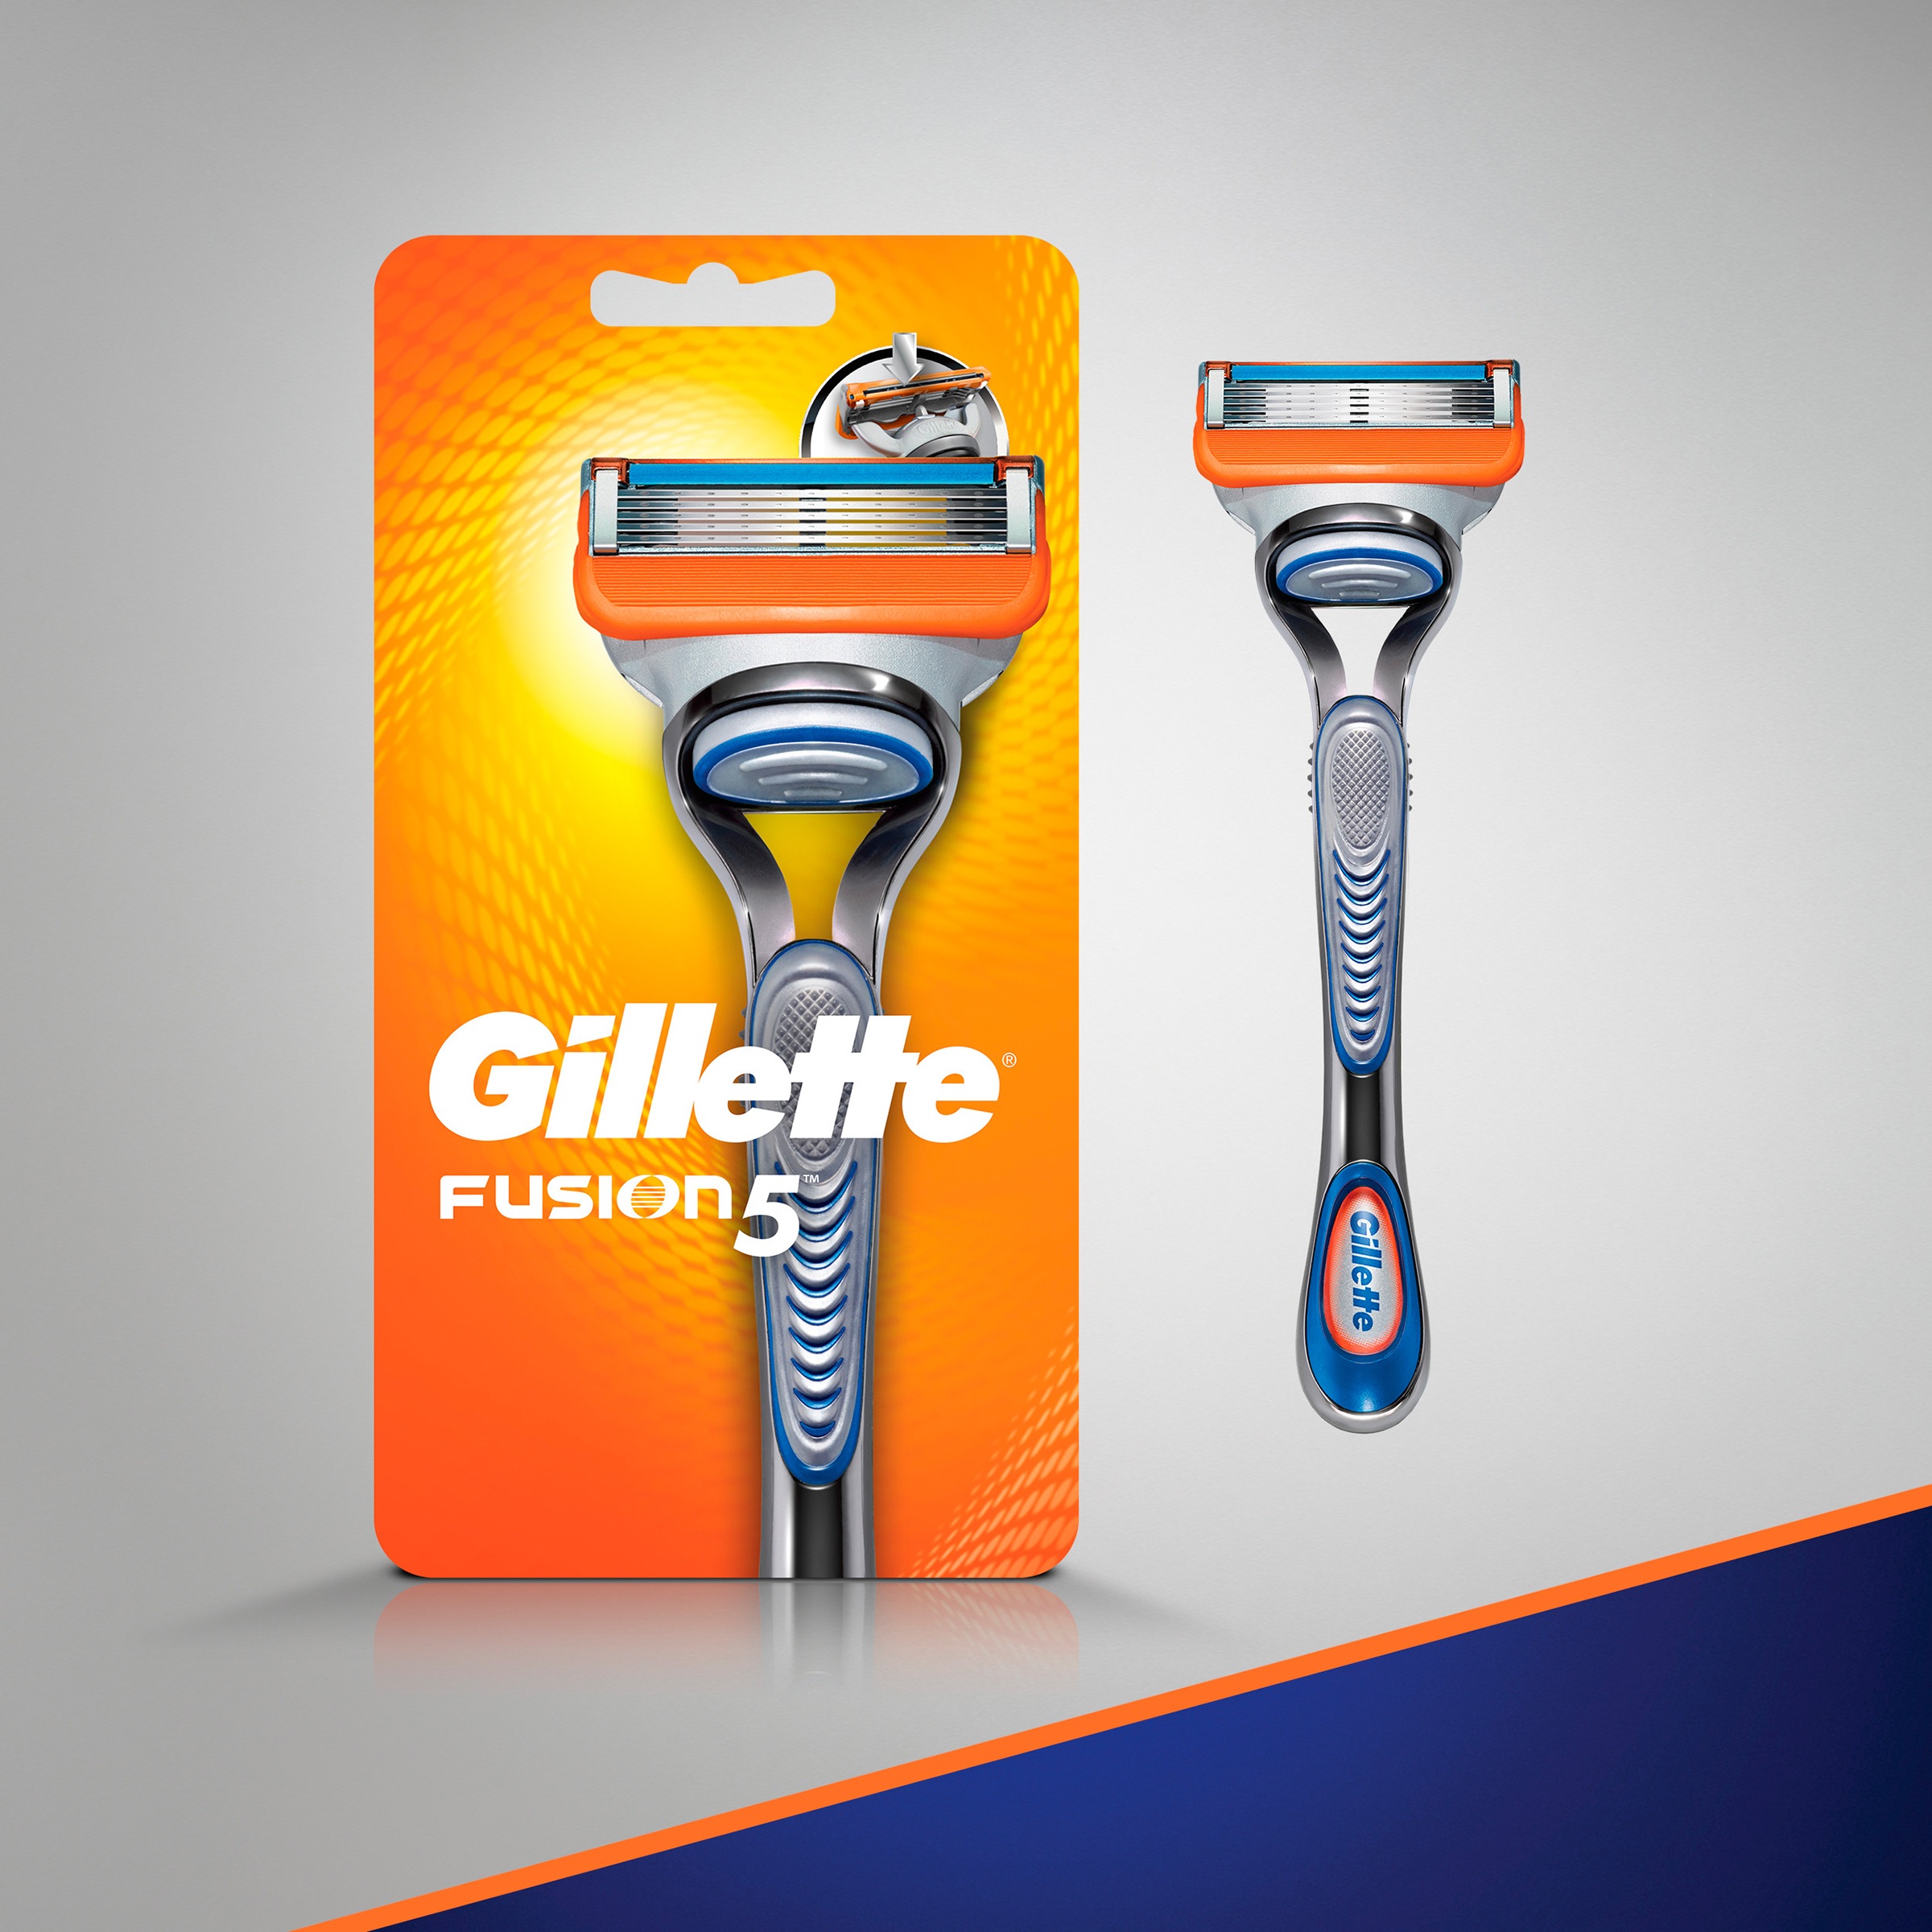 Gillette Fusion5 Razor Gift Pack - image 3 of 8